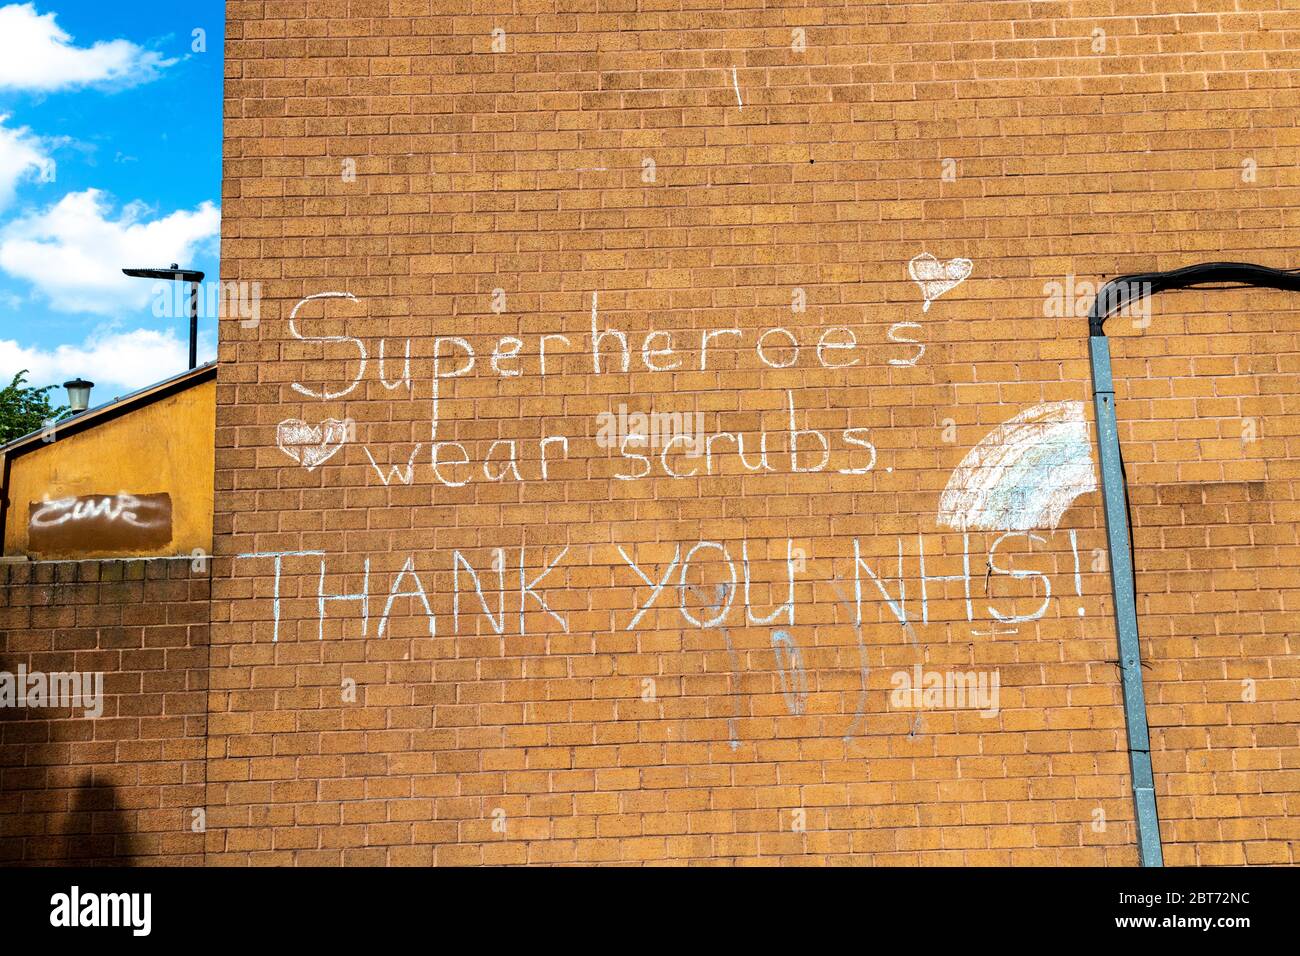 22 May 2020 London, UK - A message on a council estate block in Dalston, Hackney to support the NHS workers during the Coronavirus pandemic outbreak 'Superheroes wear scrubs, Thank you NHS!' Stock Photo